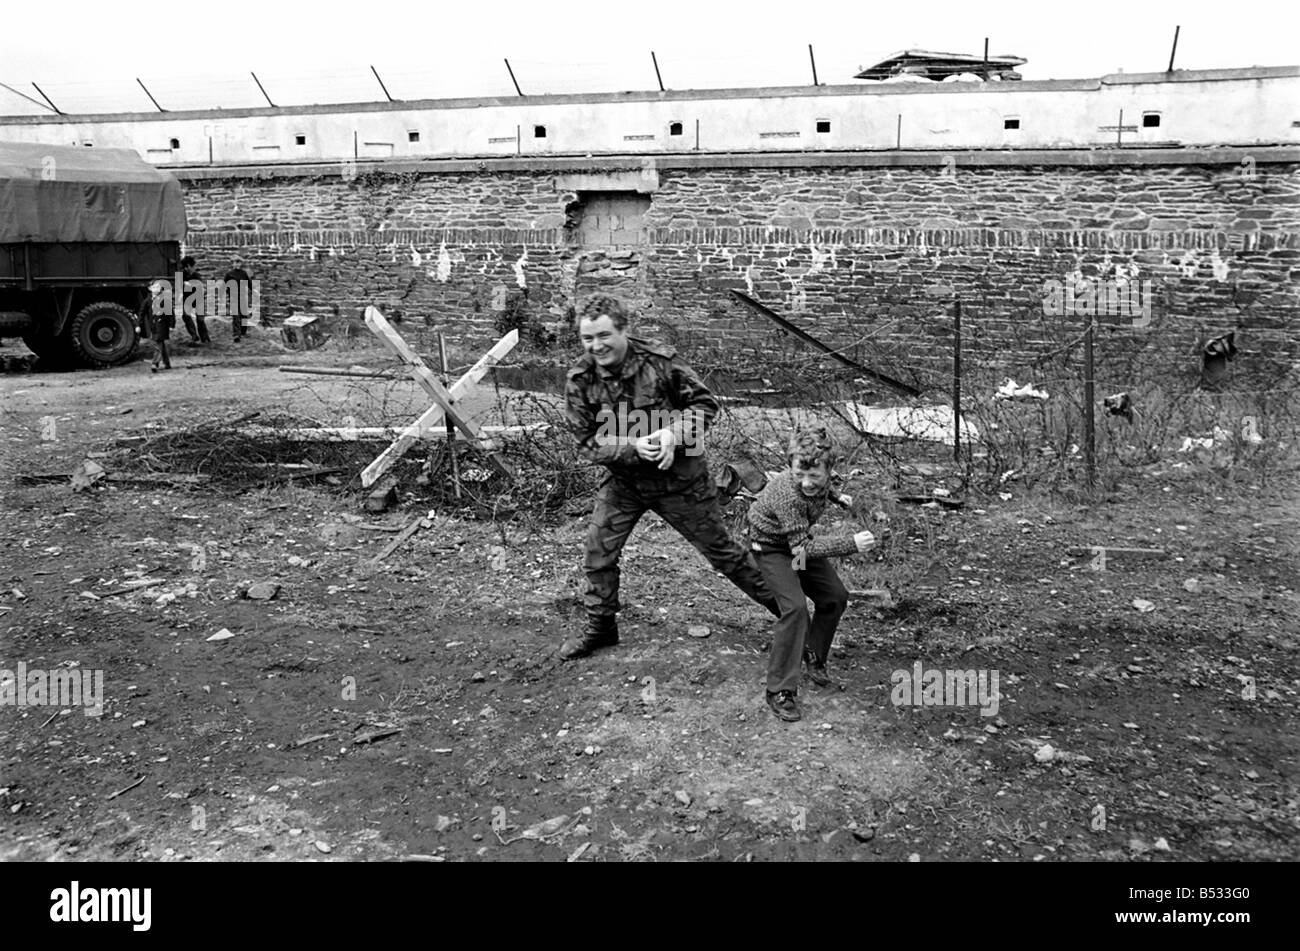 Northern Ireland June 1972. Children and soldiers play at the army base on the Foyle Road. The army were in the process of abandoning the camp. June 1972 72-7009-012 Stock Photo